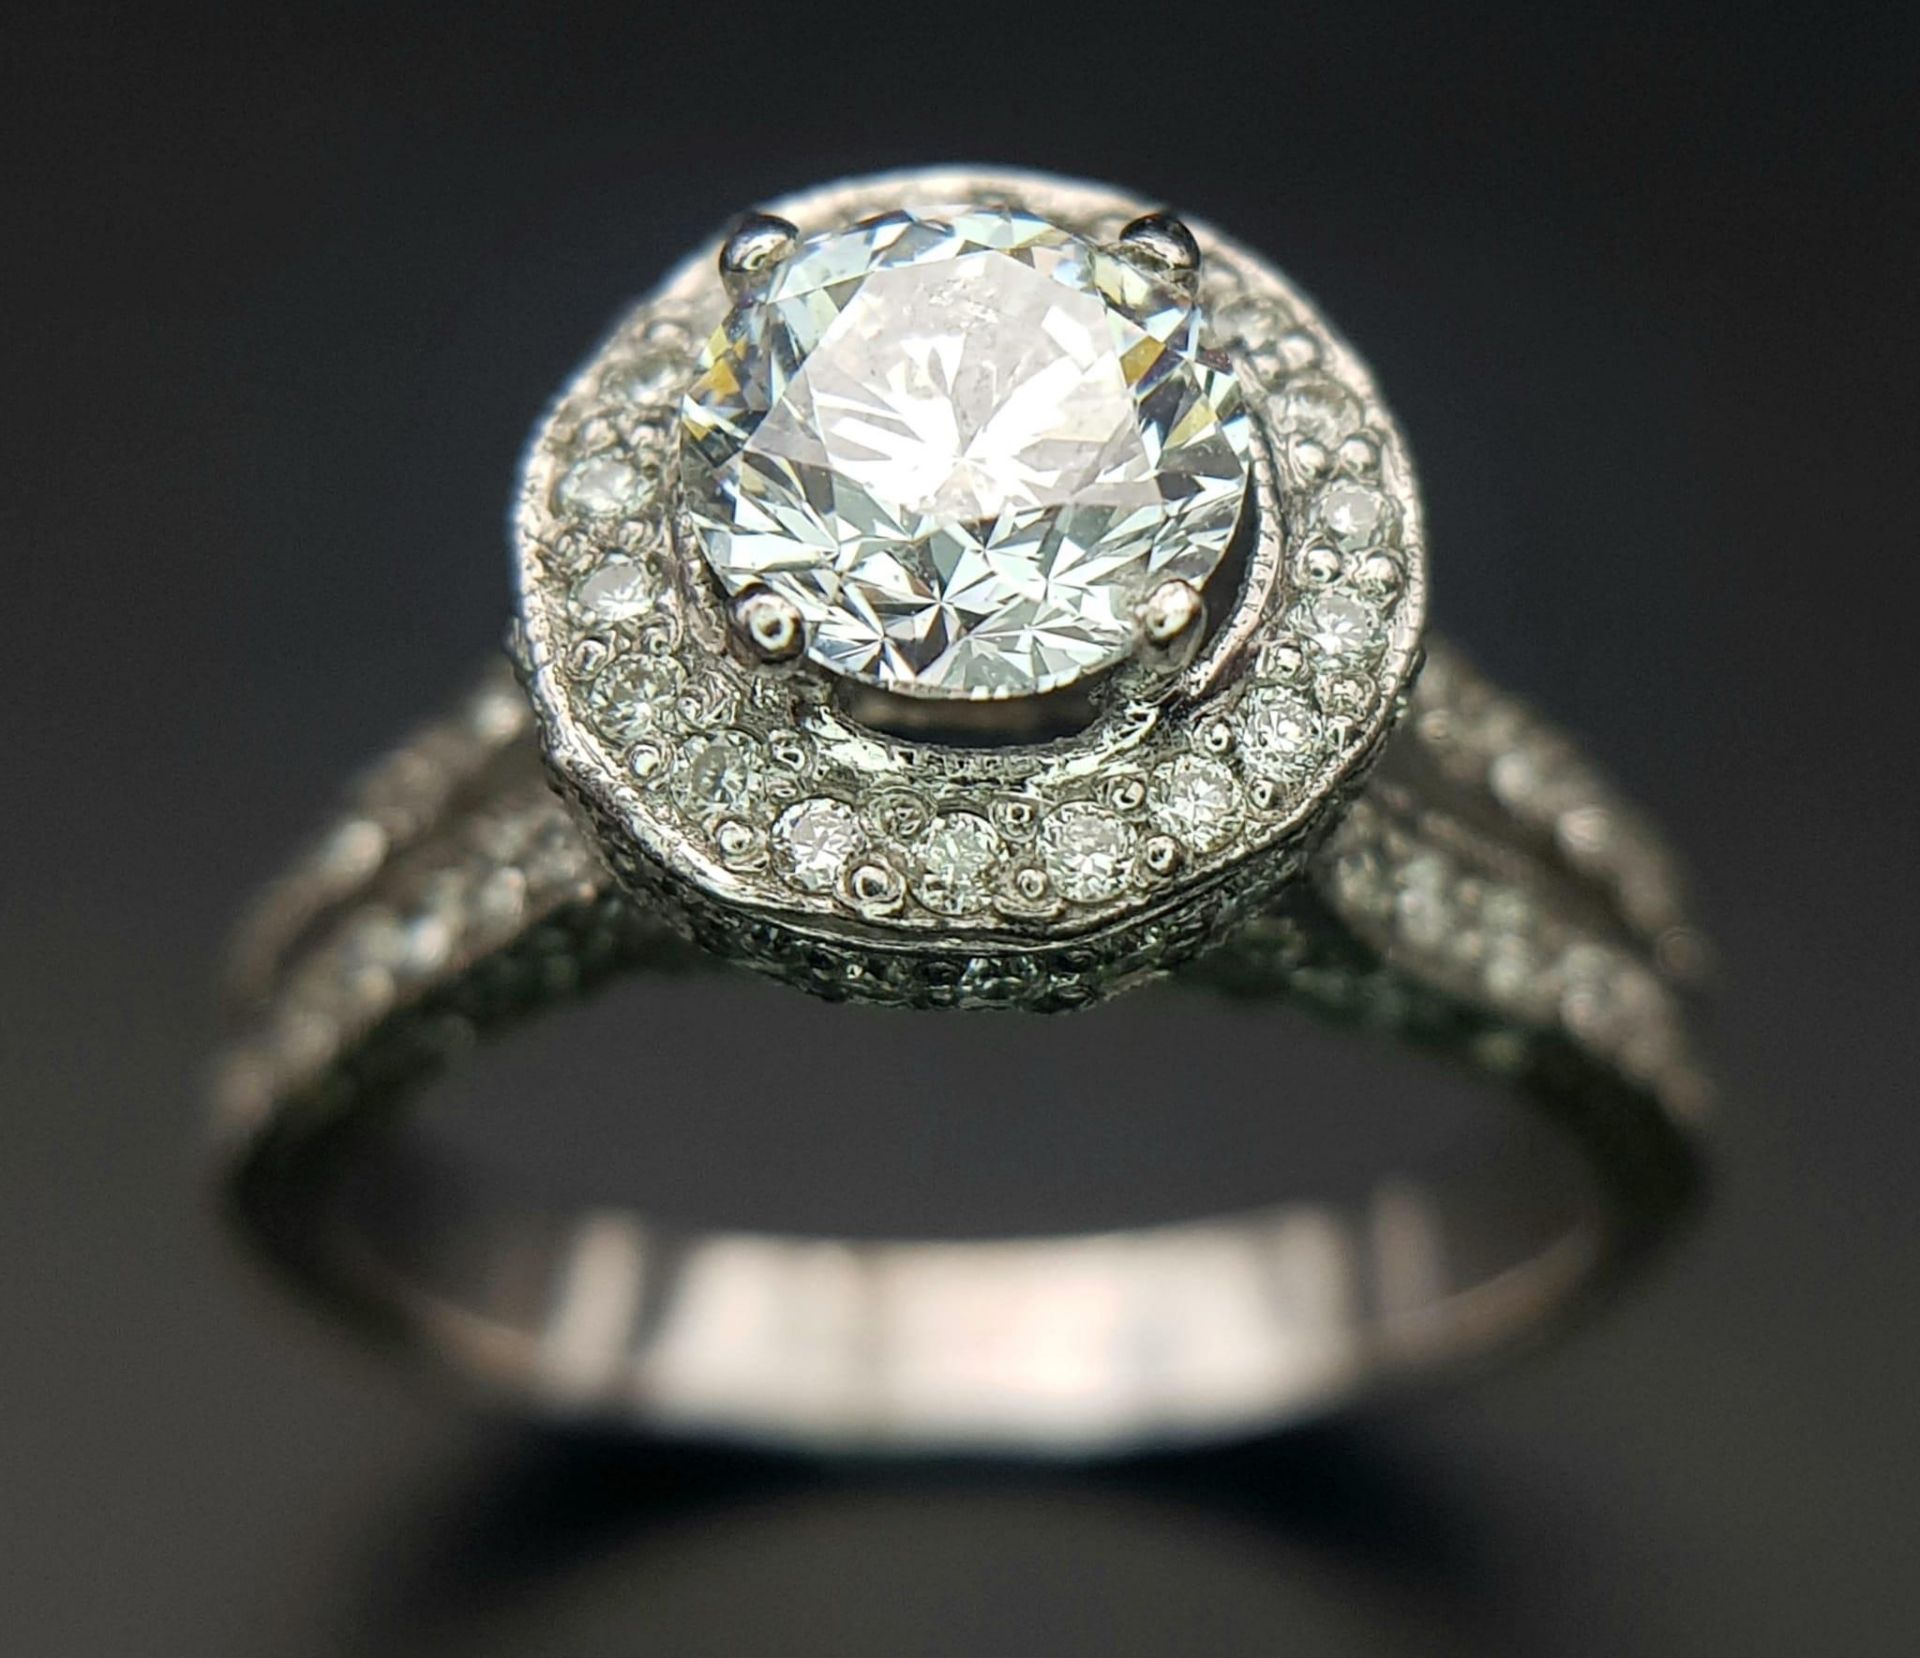 An 18 K white gold ring with a brilliant cut diamond (1.01 carats) surrounded by diamonds on the top